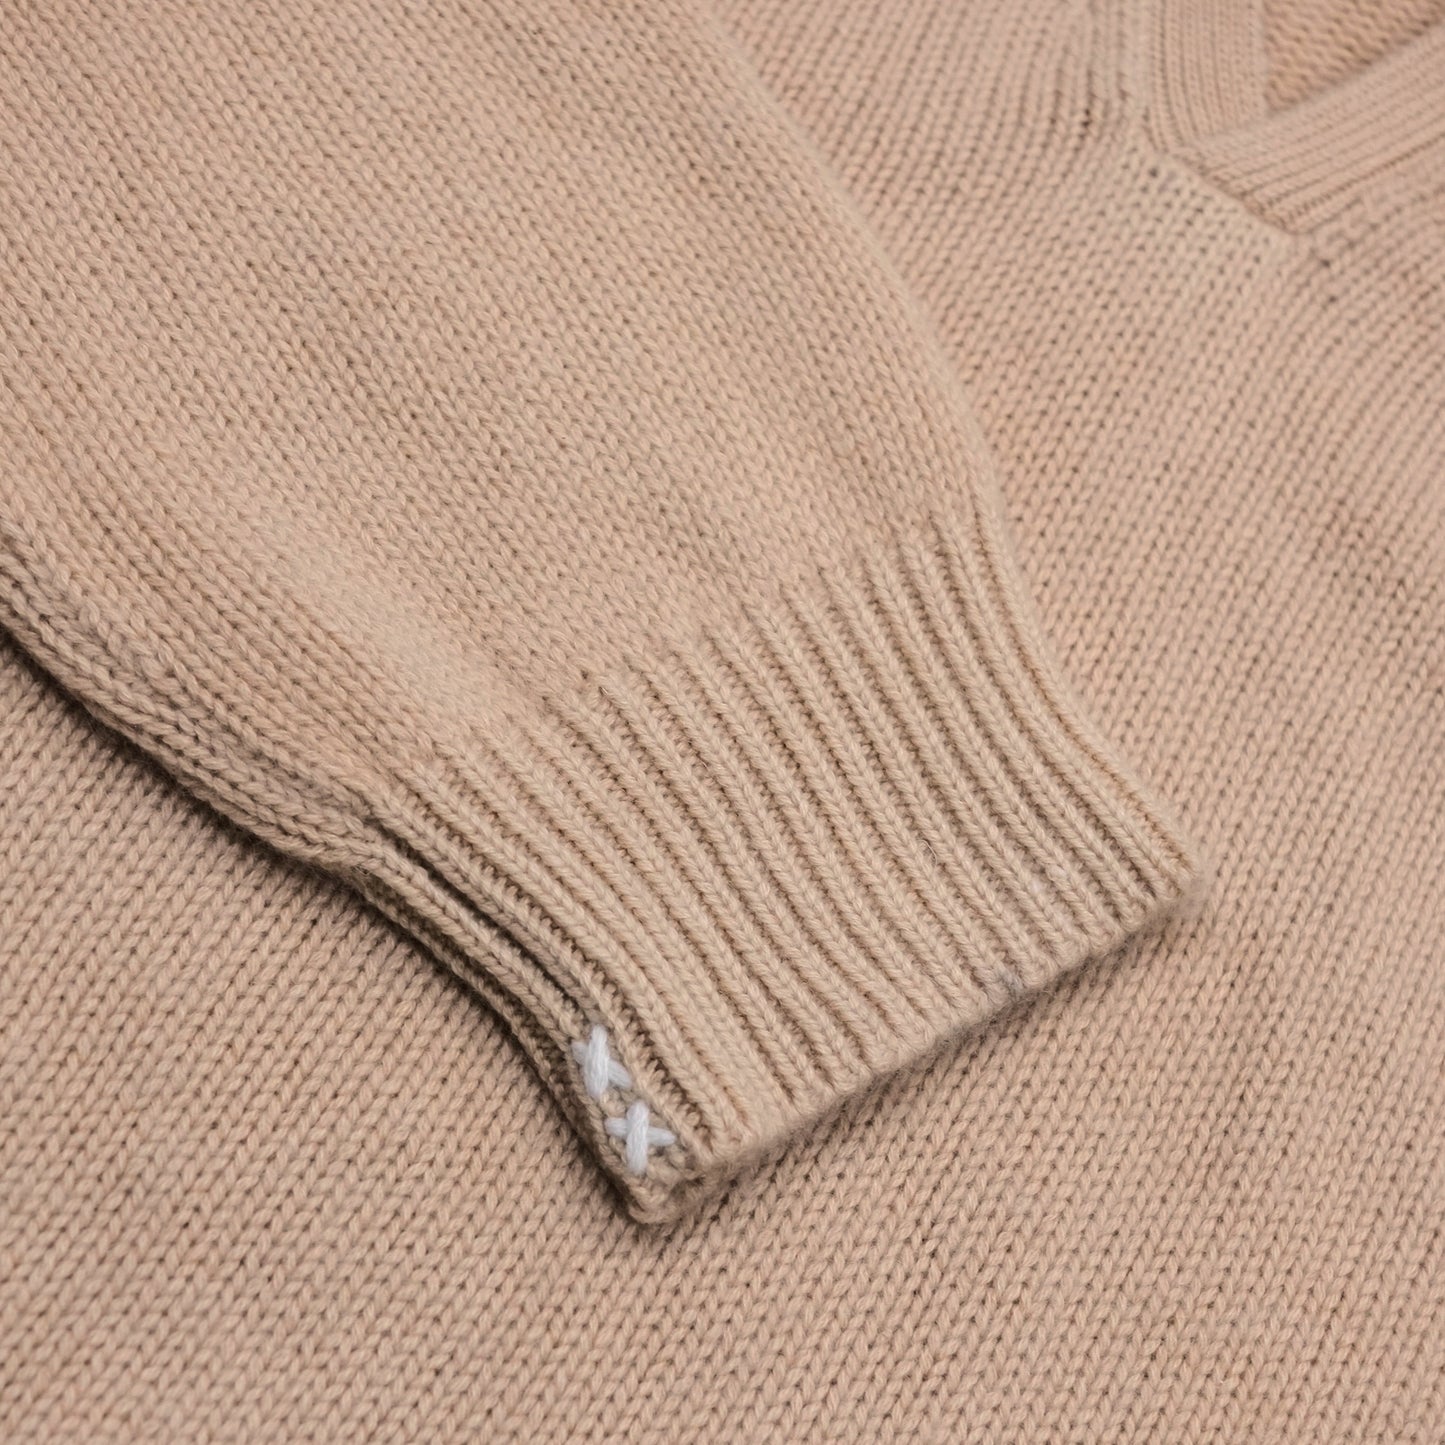 Recycled Cashmere Polo Collar Sweater